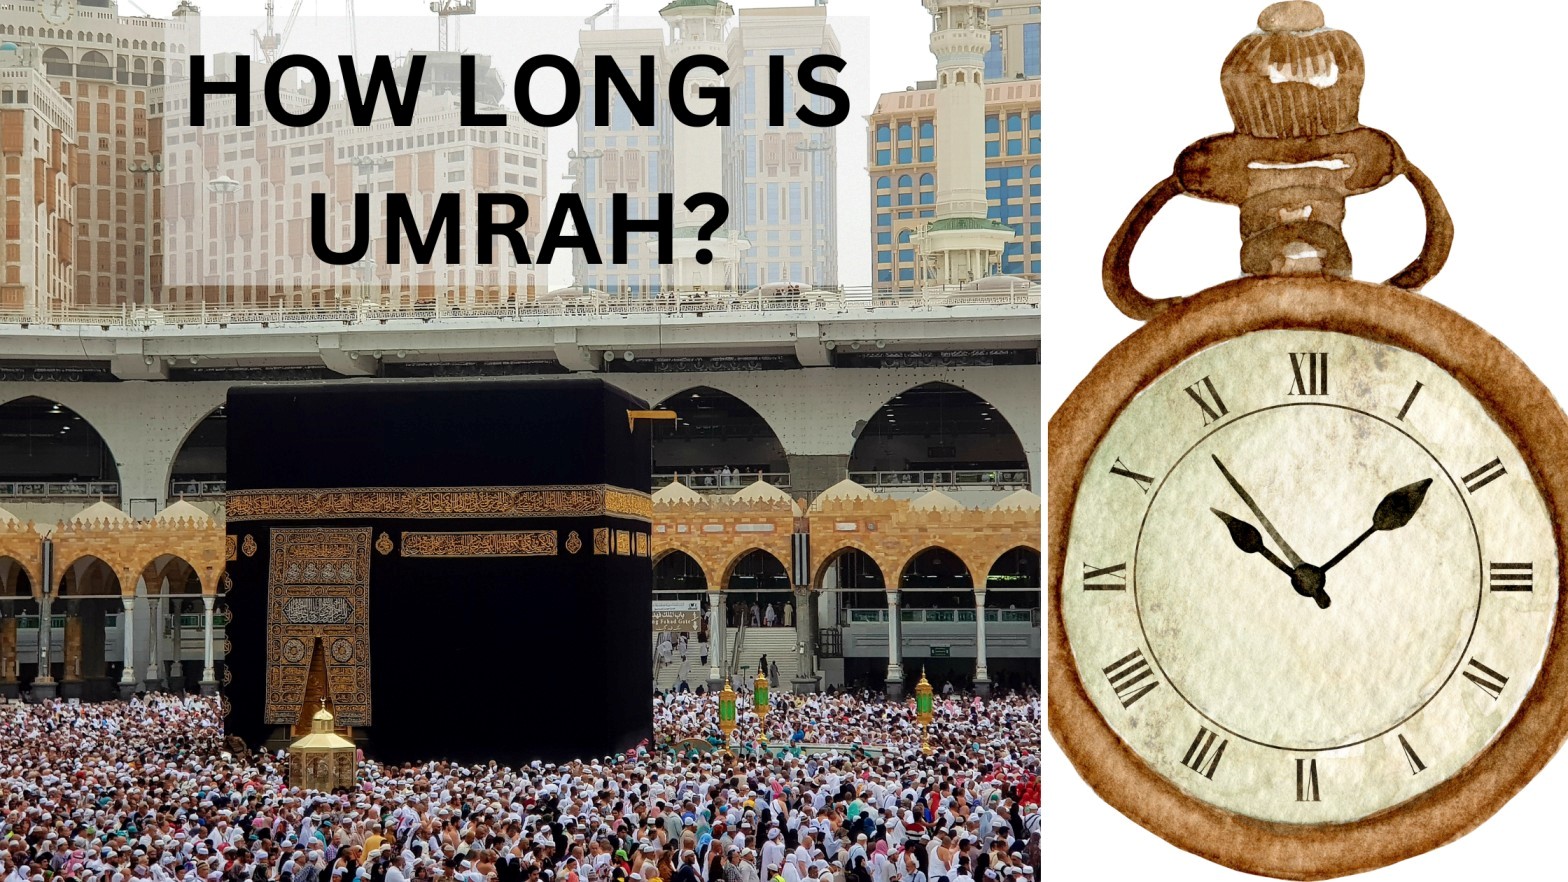 HOW LONG IS UMRAH?